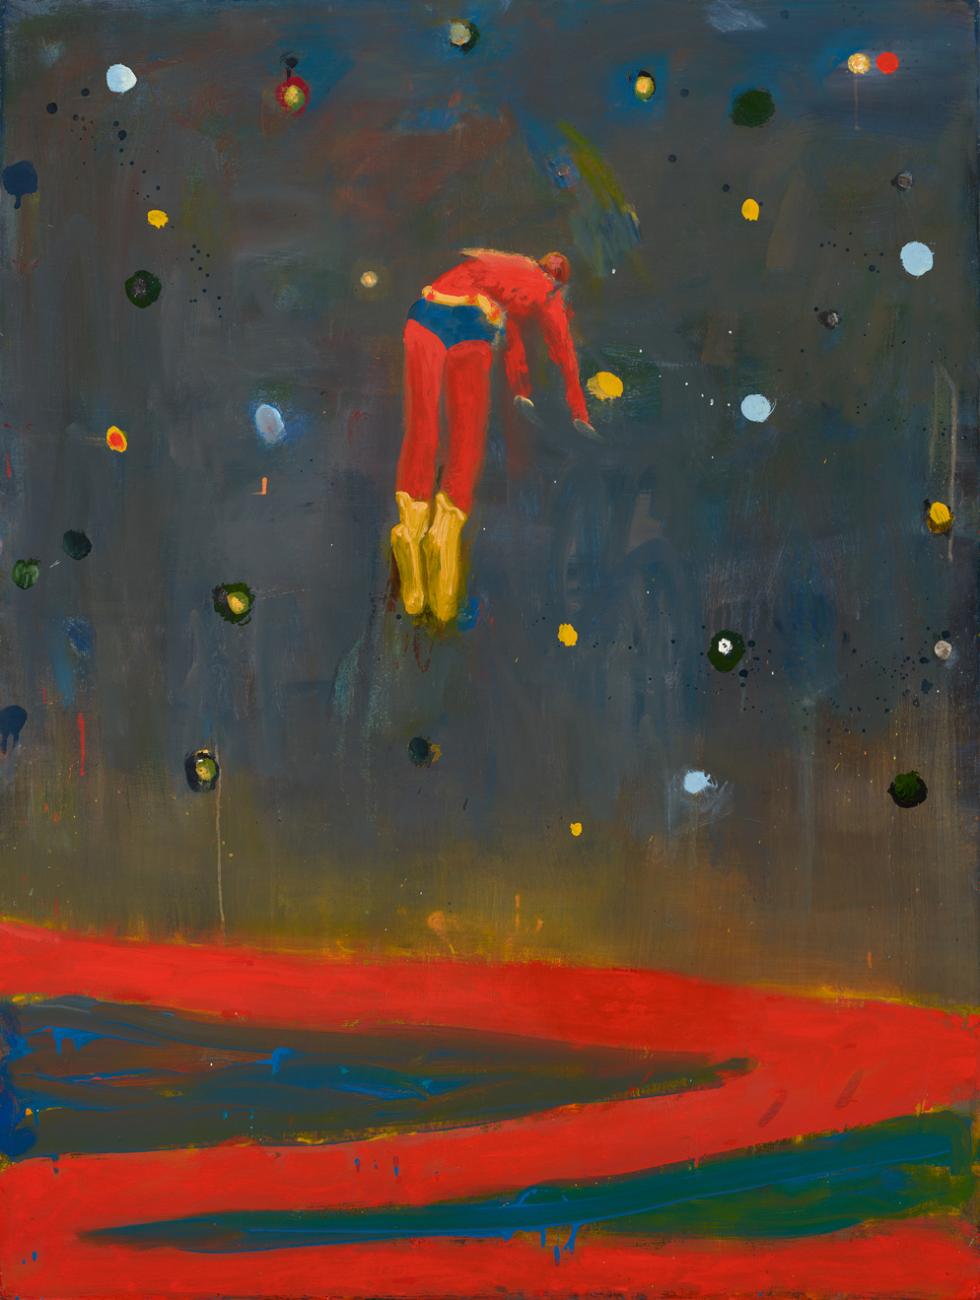 Oil painting of a figure in a superhero outfit floating limply in the air with a dark sky beyond with colorful stars or planets in it and a red path below